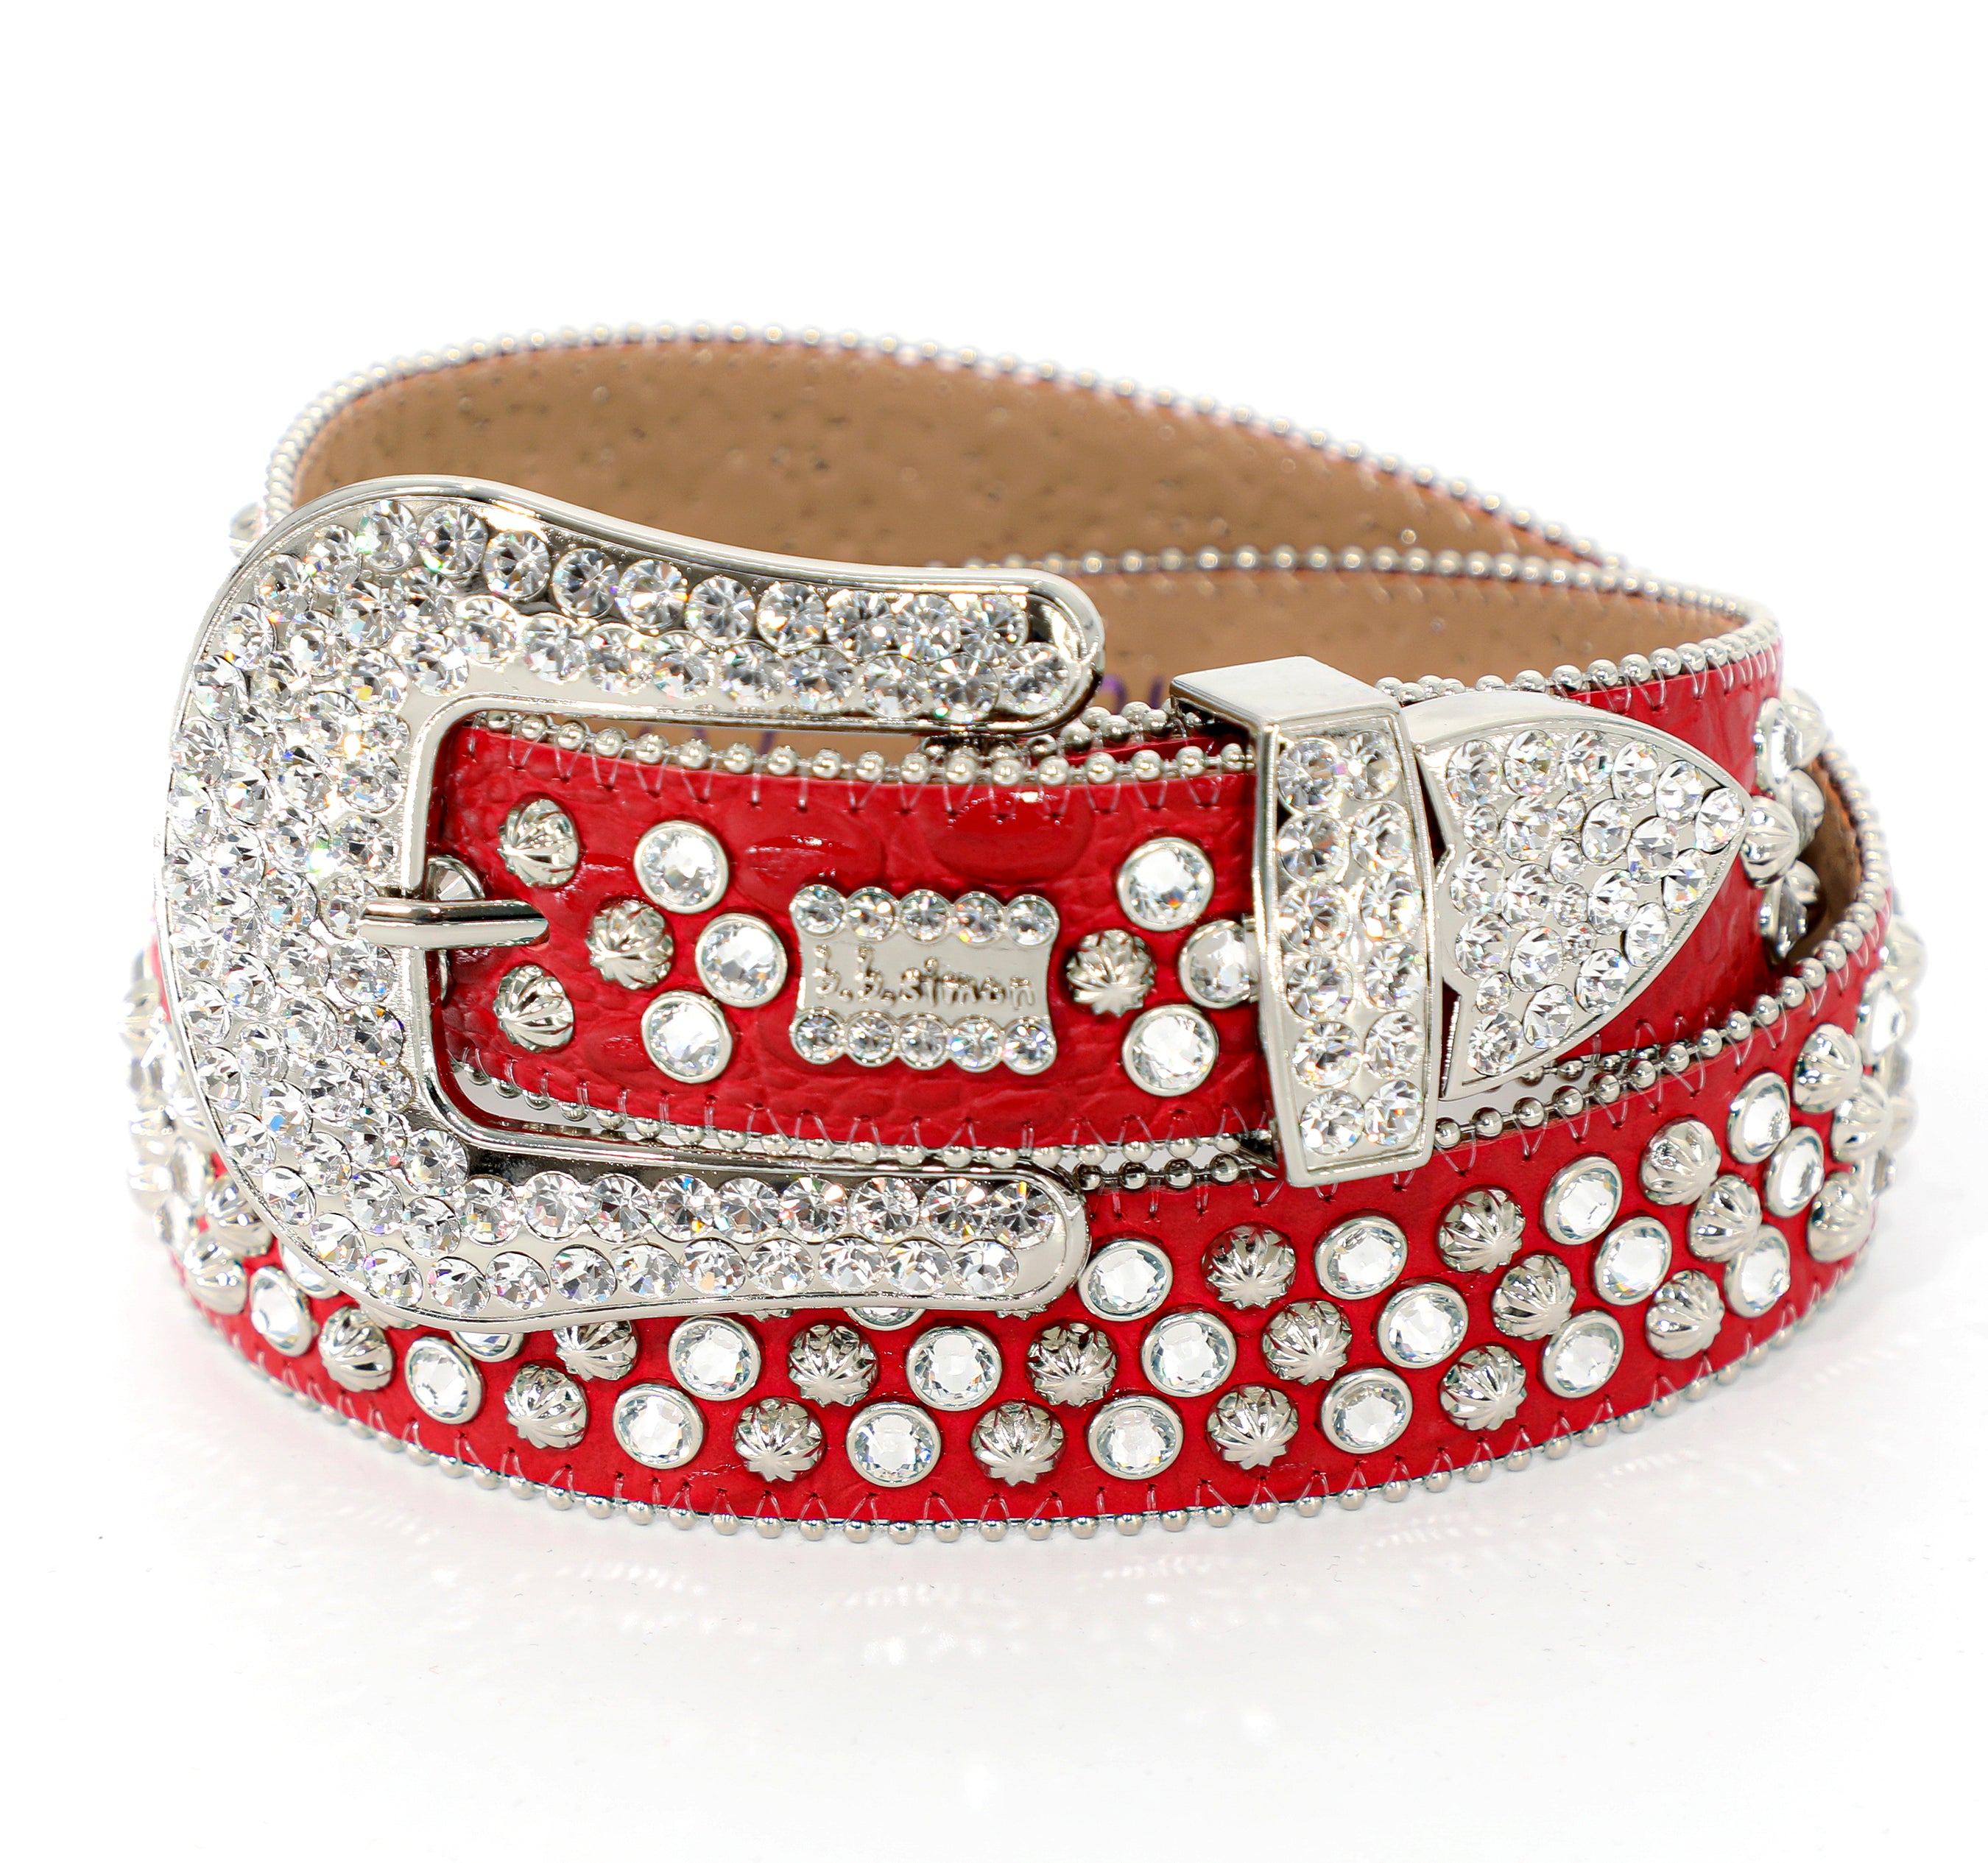 B.B Simon Red Belt with All Silver Crystals and Parachute Studs